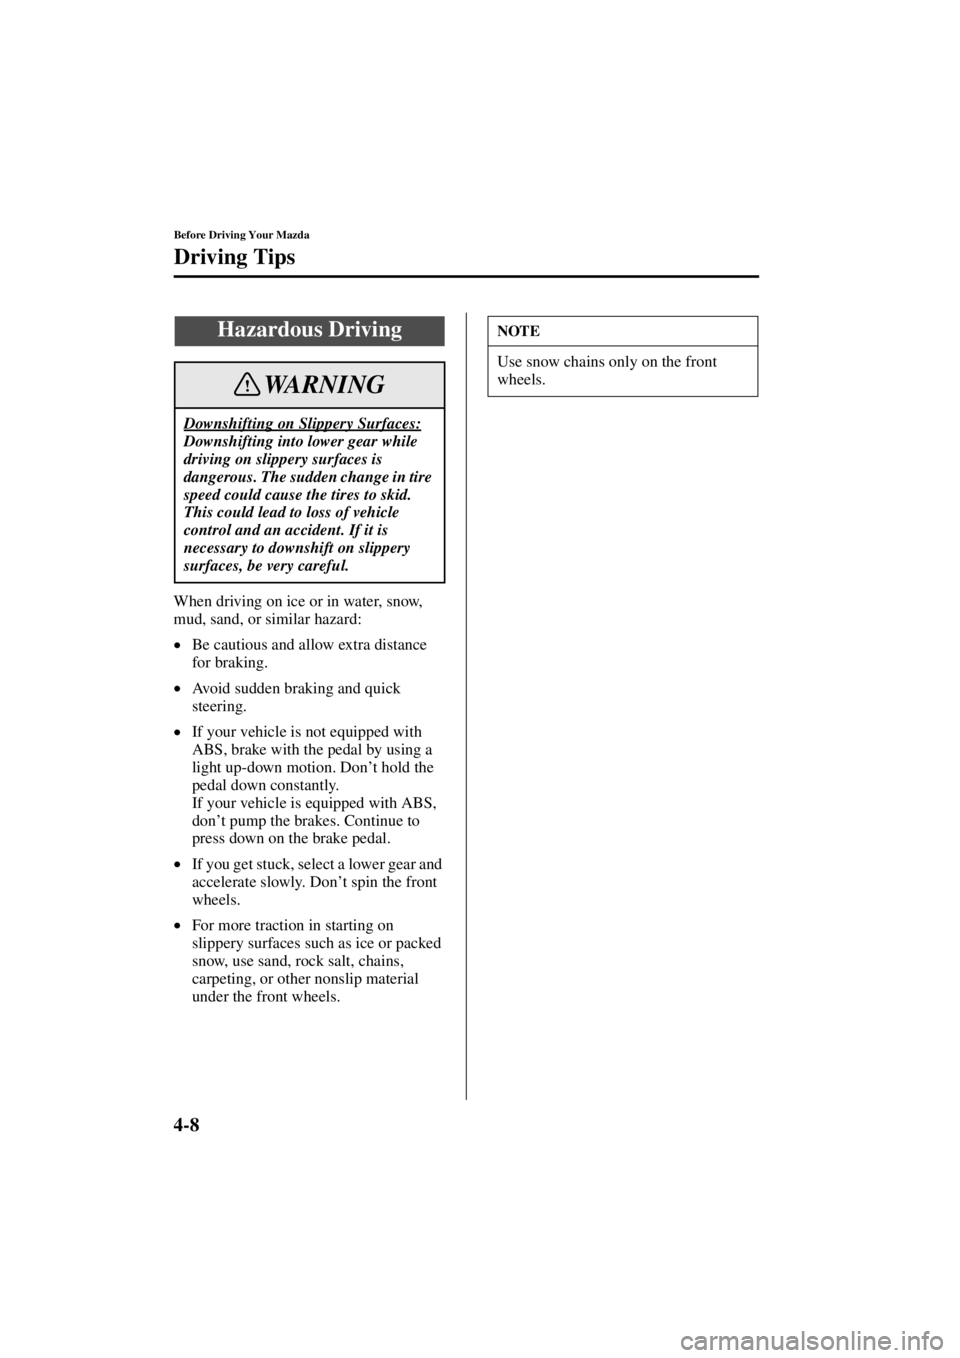 MAZDA MODEL 3 4-DOOR 2004  Owners Manual 4-8
Before Driving Your Mazda
Driving Tips
Form No. 8S18-EA-03I
When driving on ice or in water, snow, 
mud, sand, or similar hazard:
•Be cautious and allow extra distance 
for braking.
• Avoid su